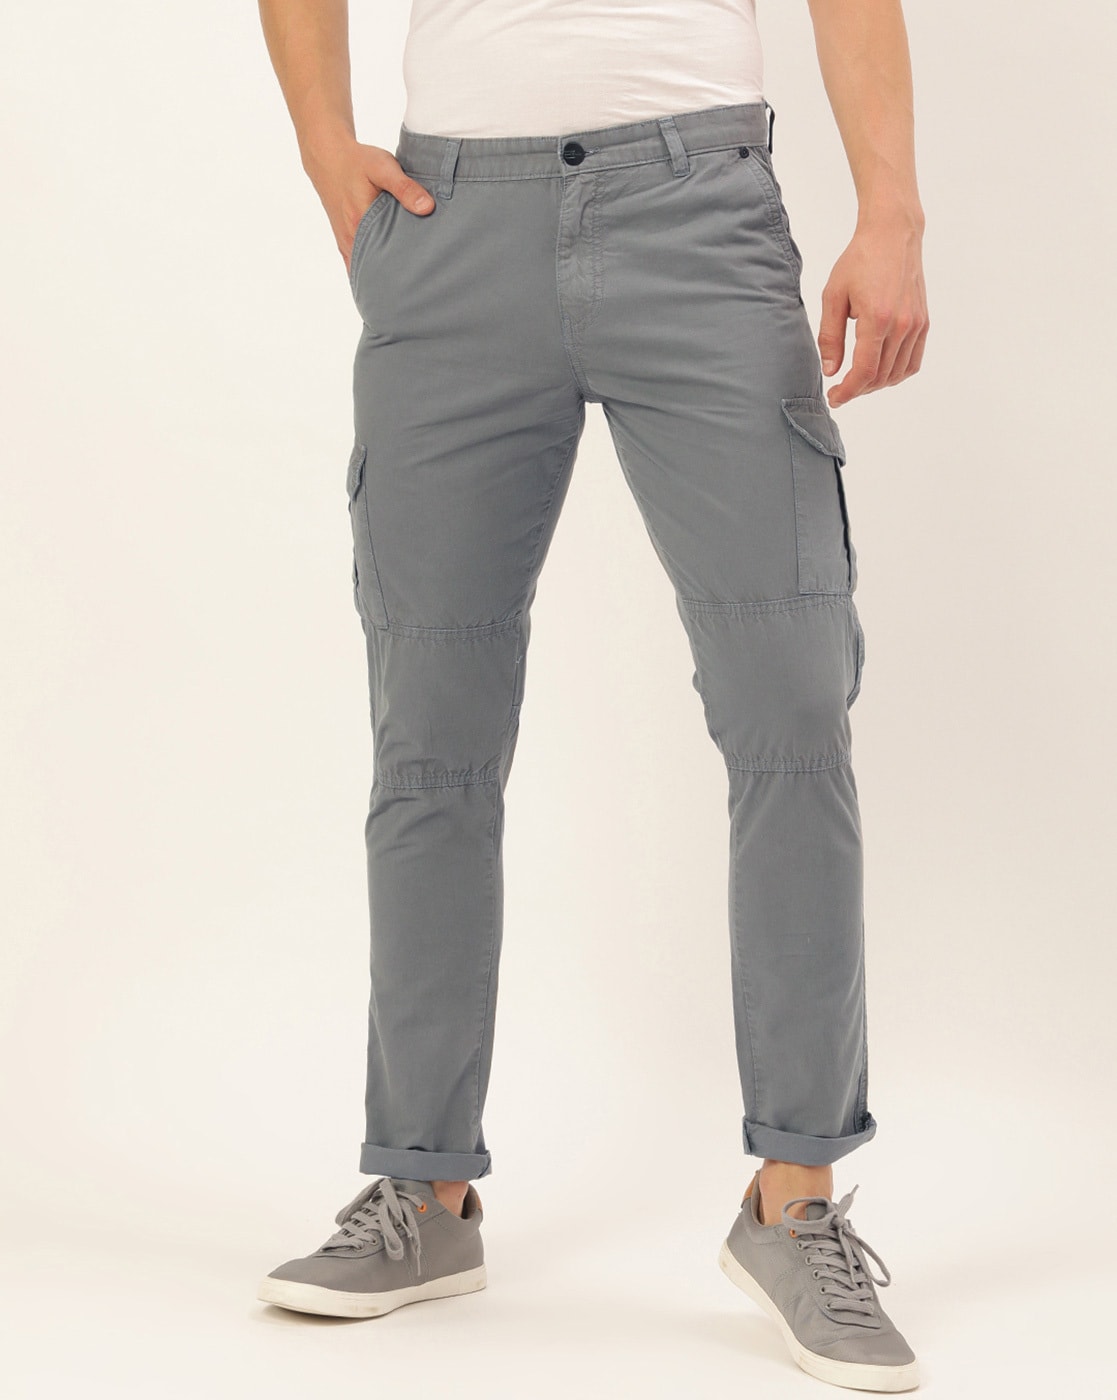 Mens Cargo Work Trousers – Afs Fashion